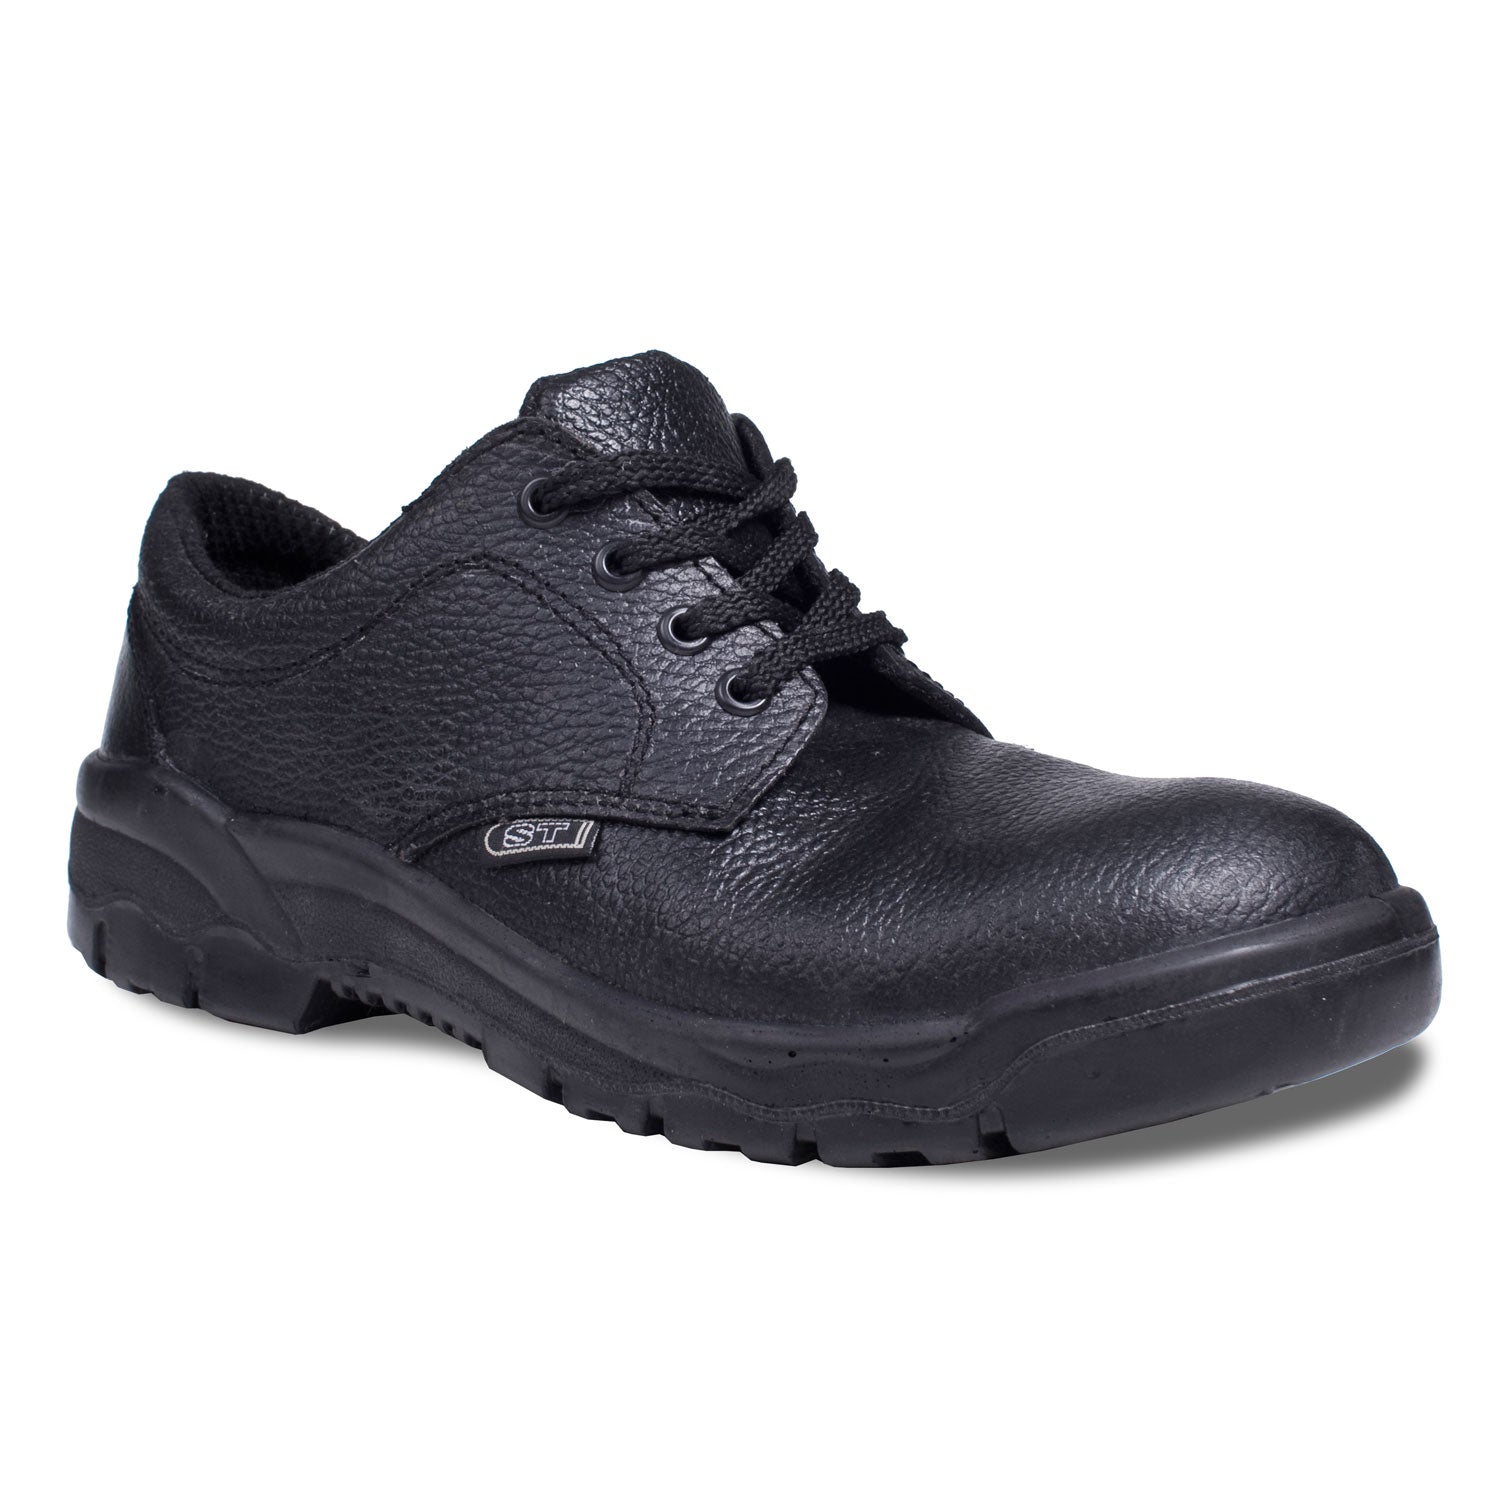 Supertouch Safety Shoe